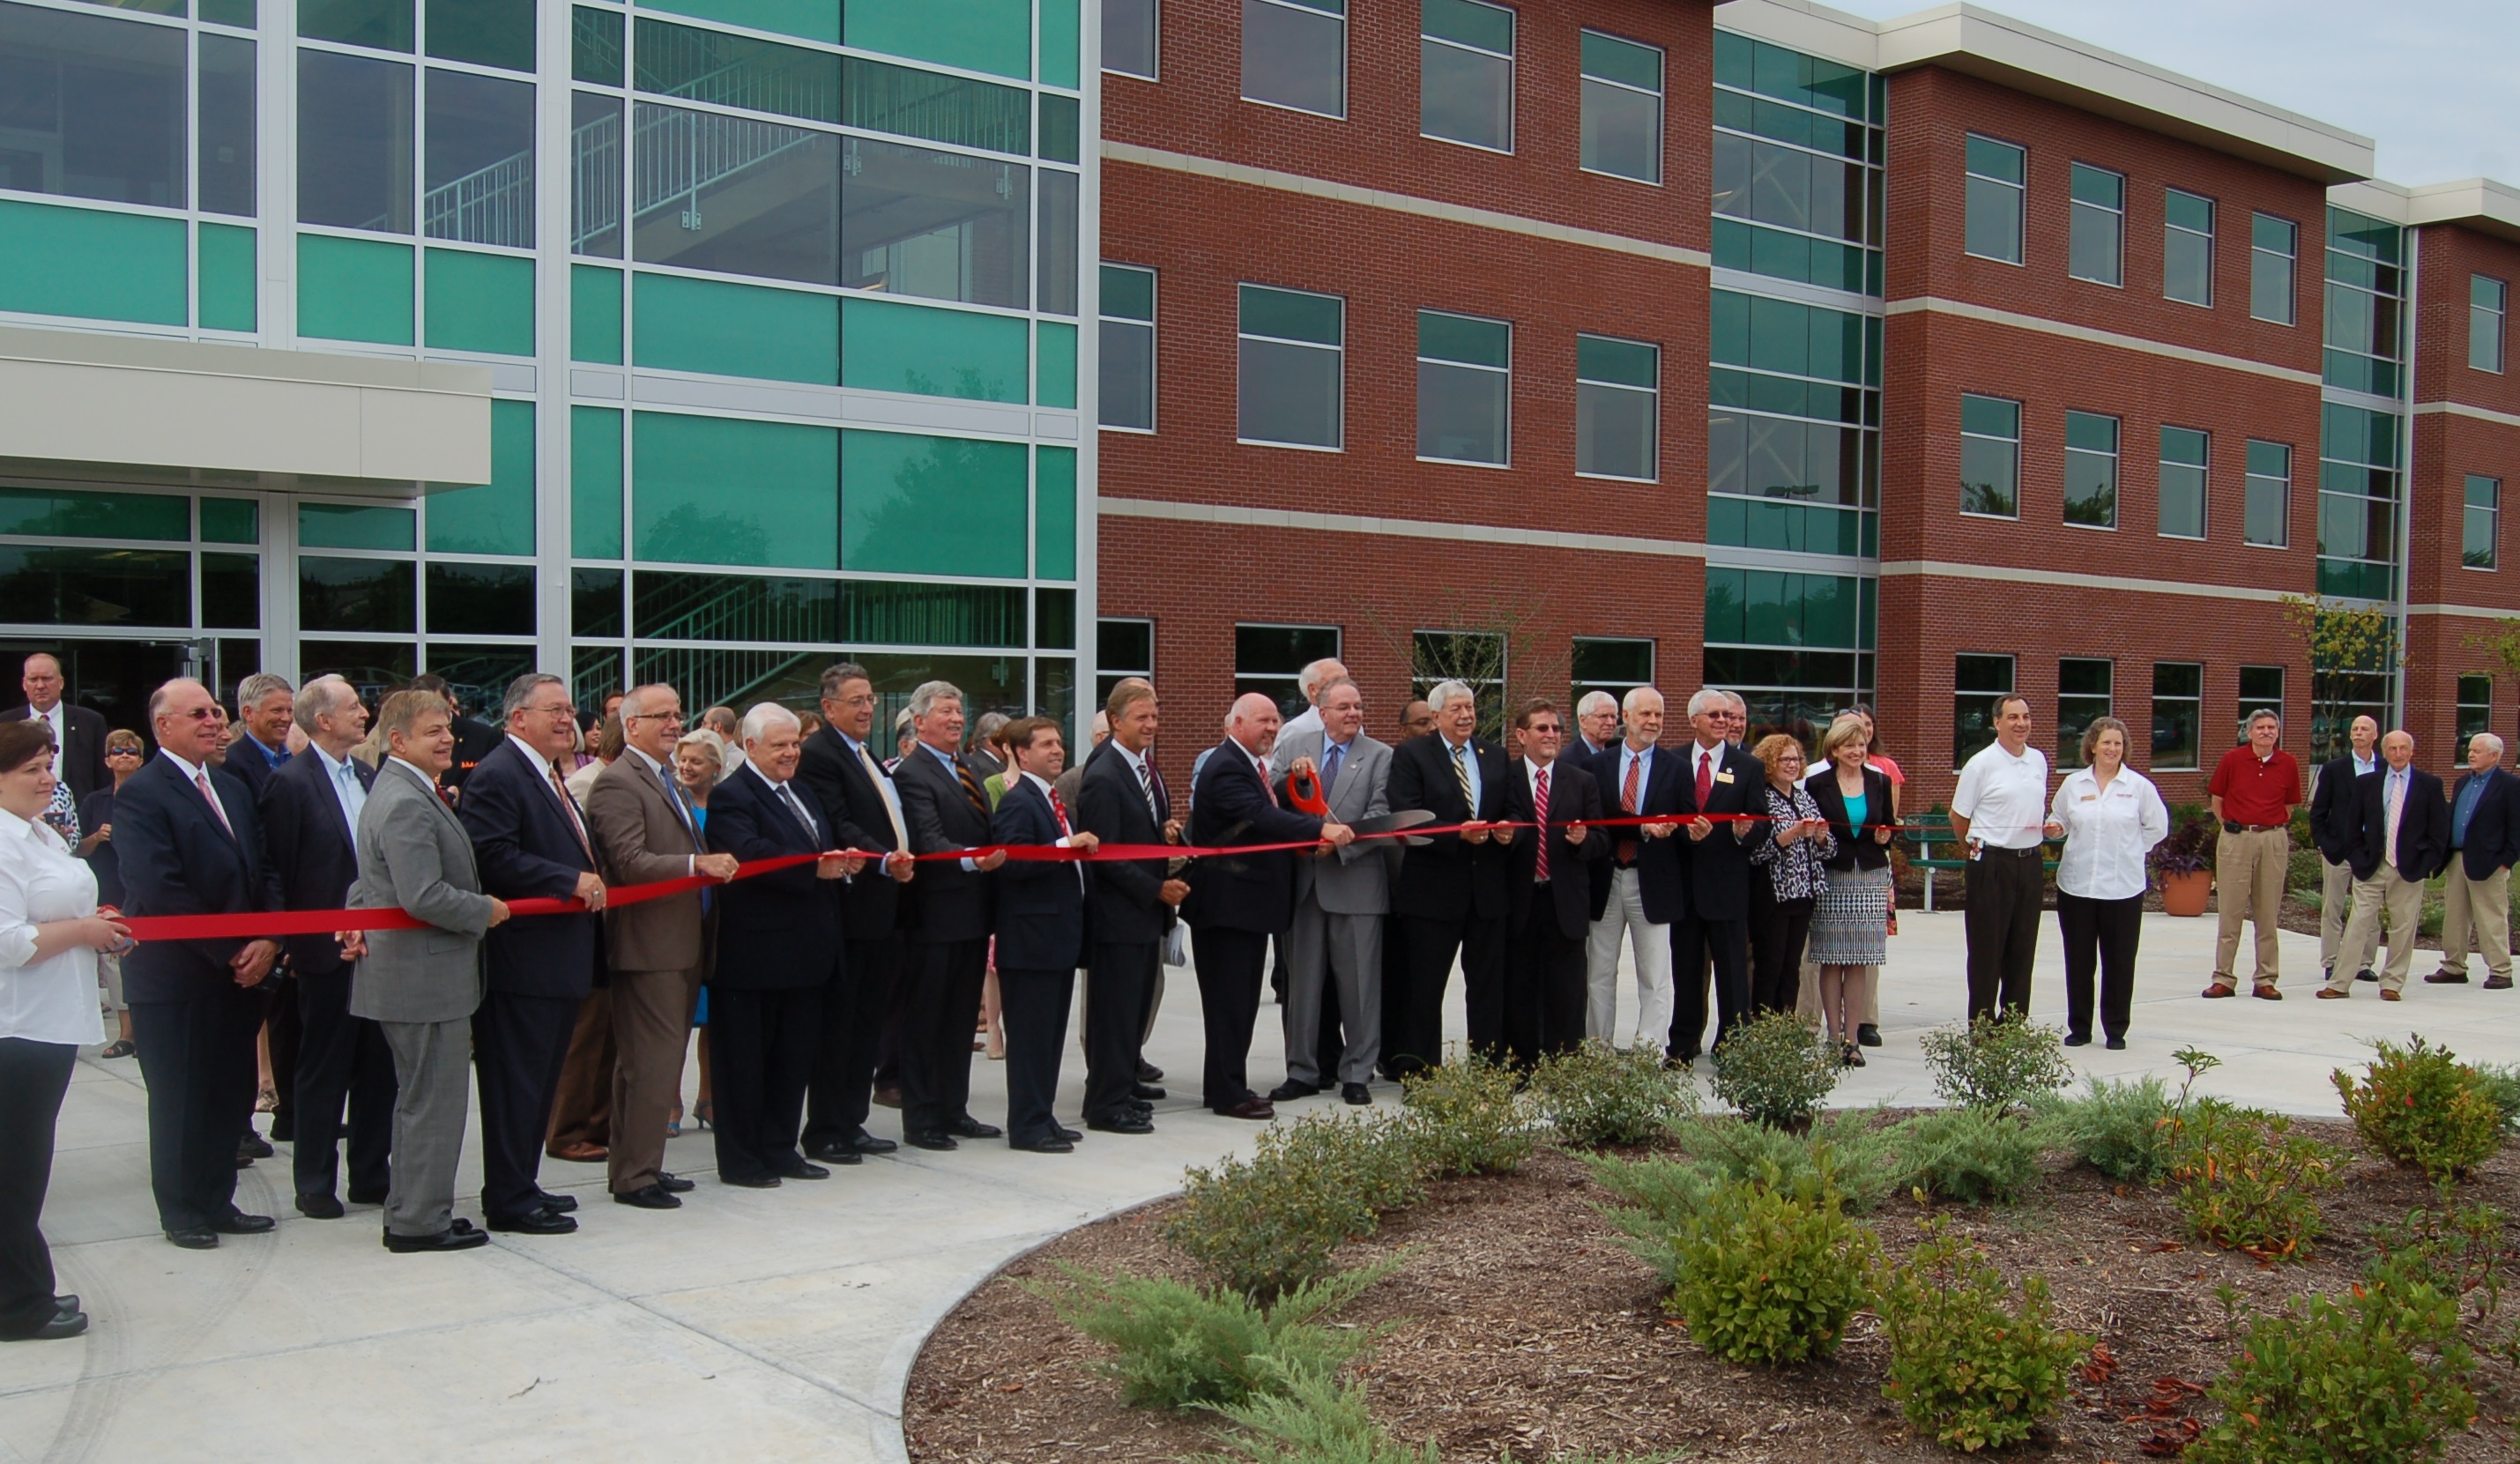 Leaders and officials cut the ribbon for the new building at Oakk Ridge campus.